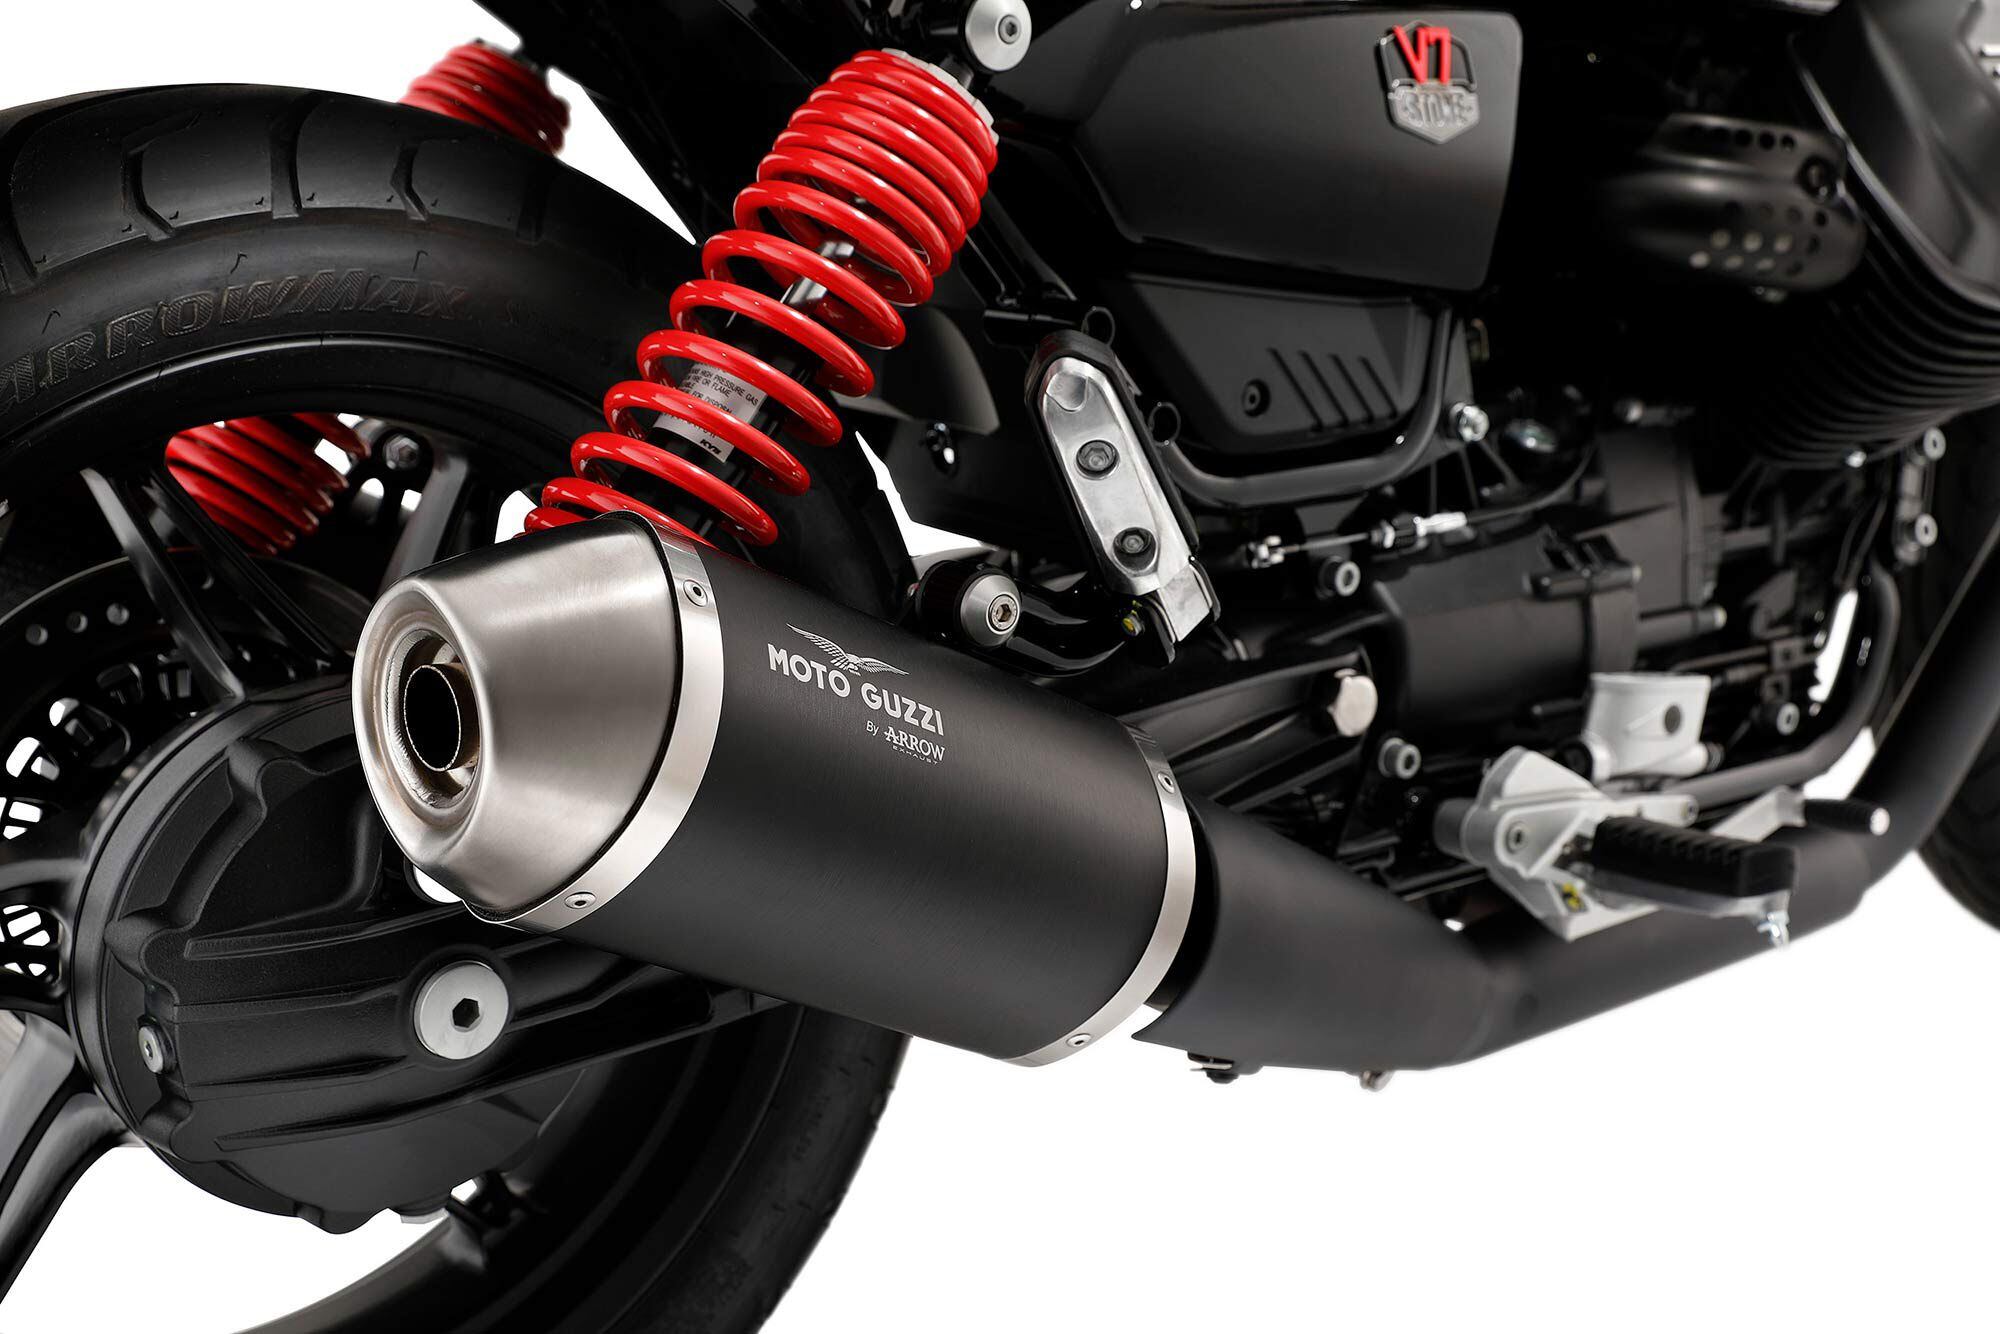 An Arrow exhaust system is responsible for a modest 1.5 hp gain, but it also flattens the bike’s torque curve, looks sharp, and sounds great.